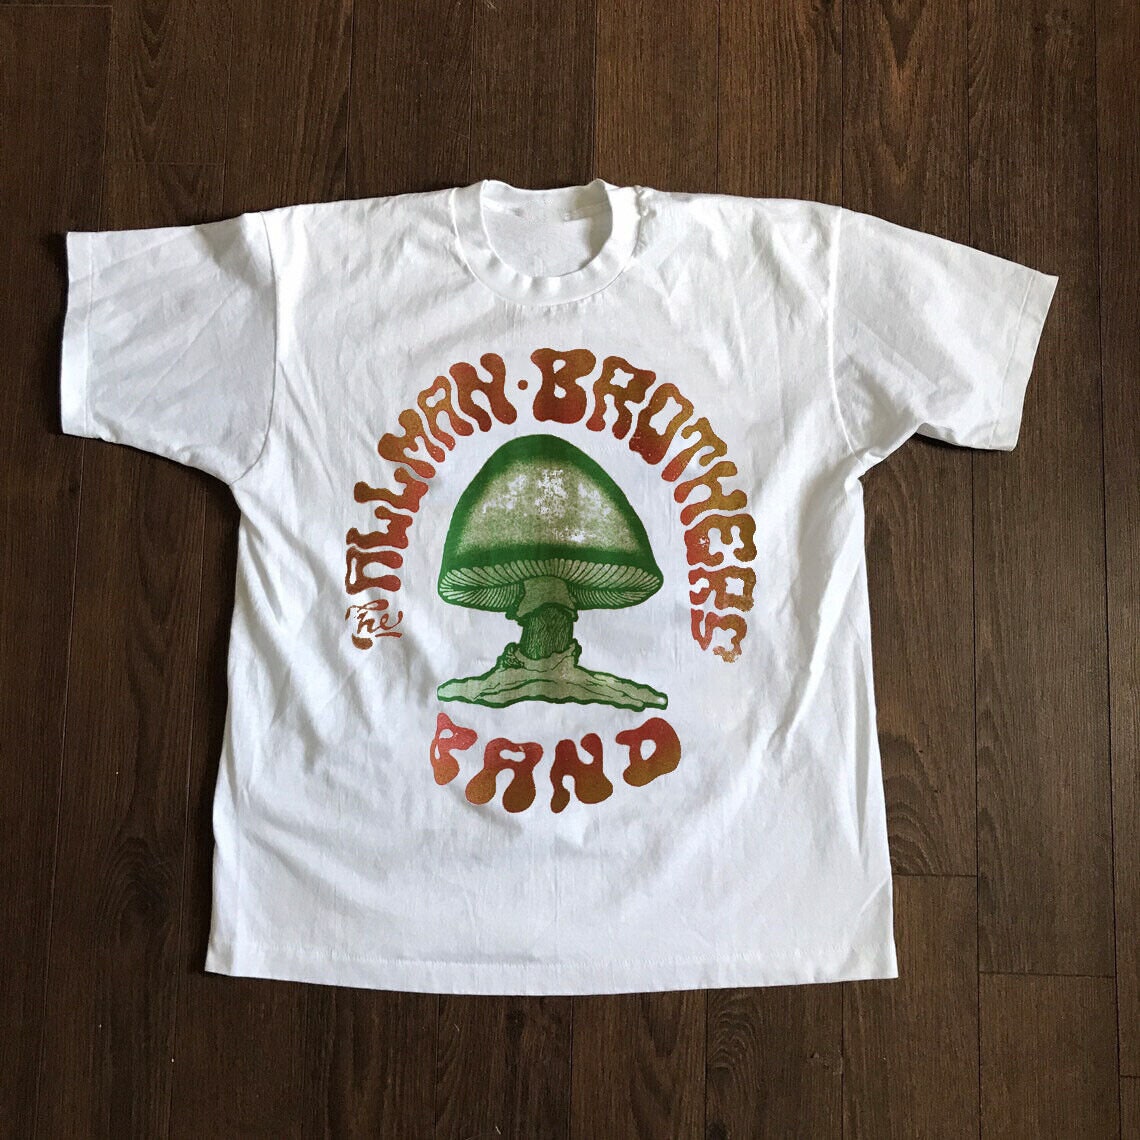 The Allman Brothers Band Music Concert T-Shirt